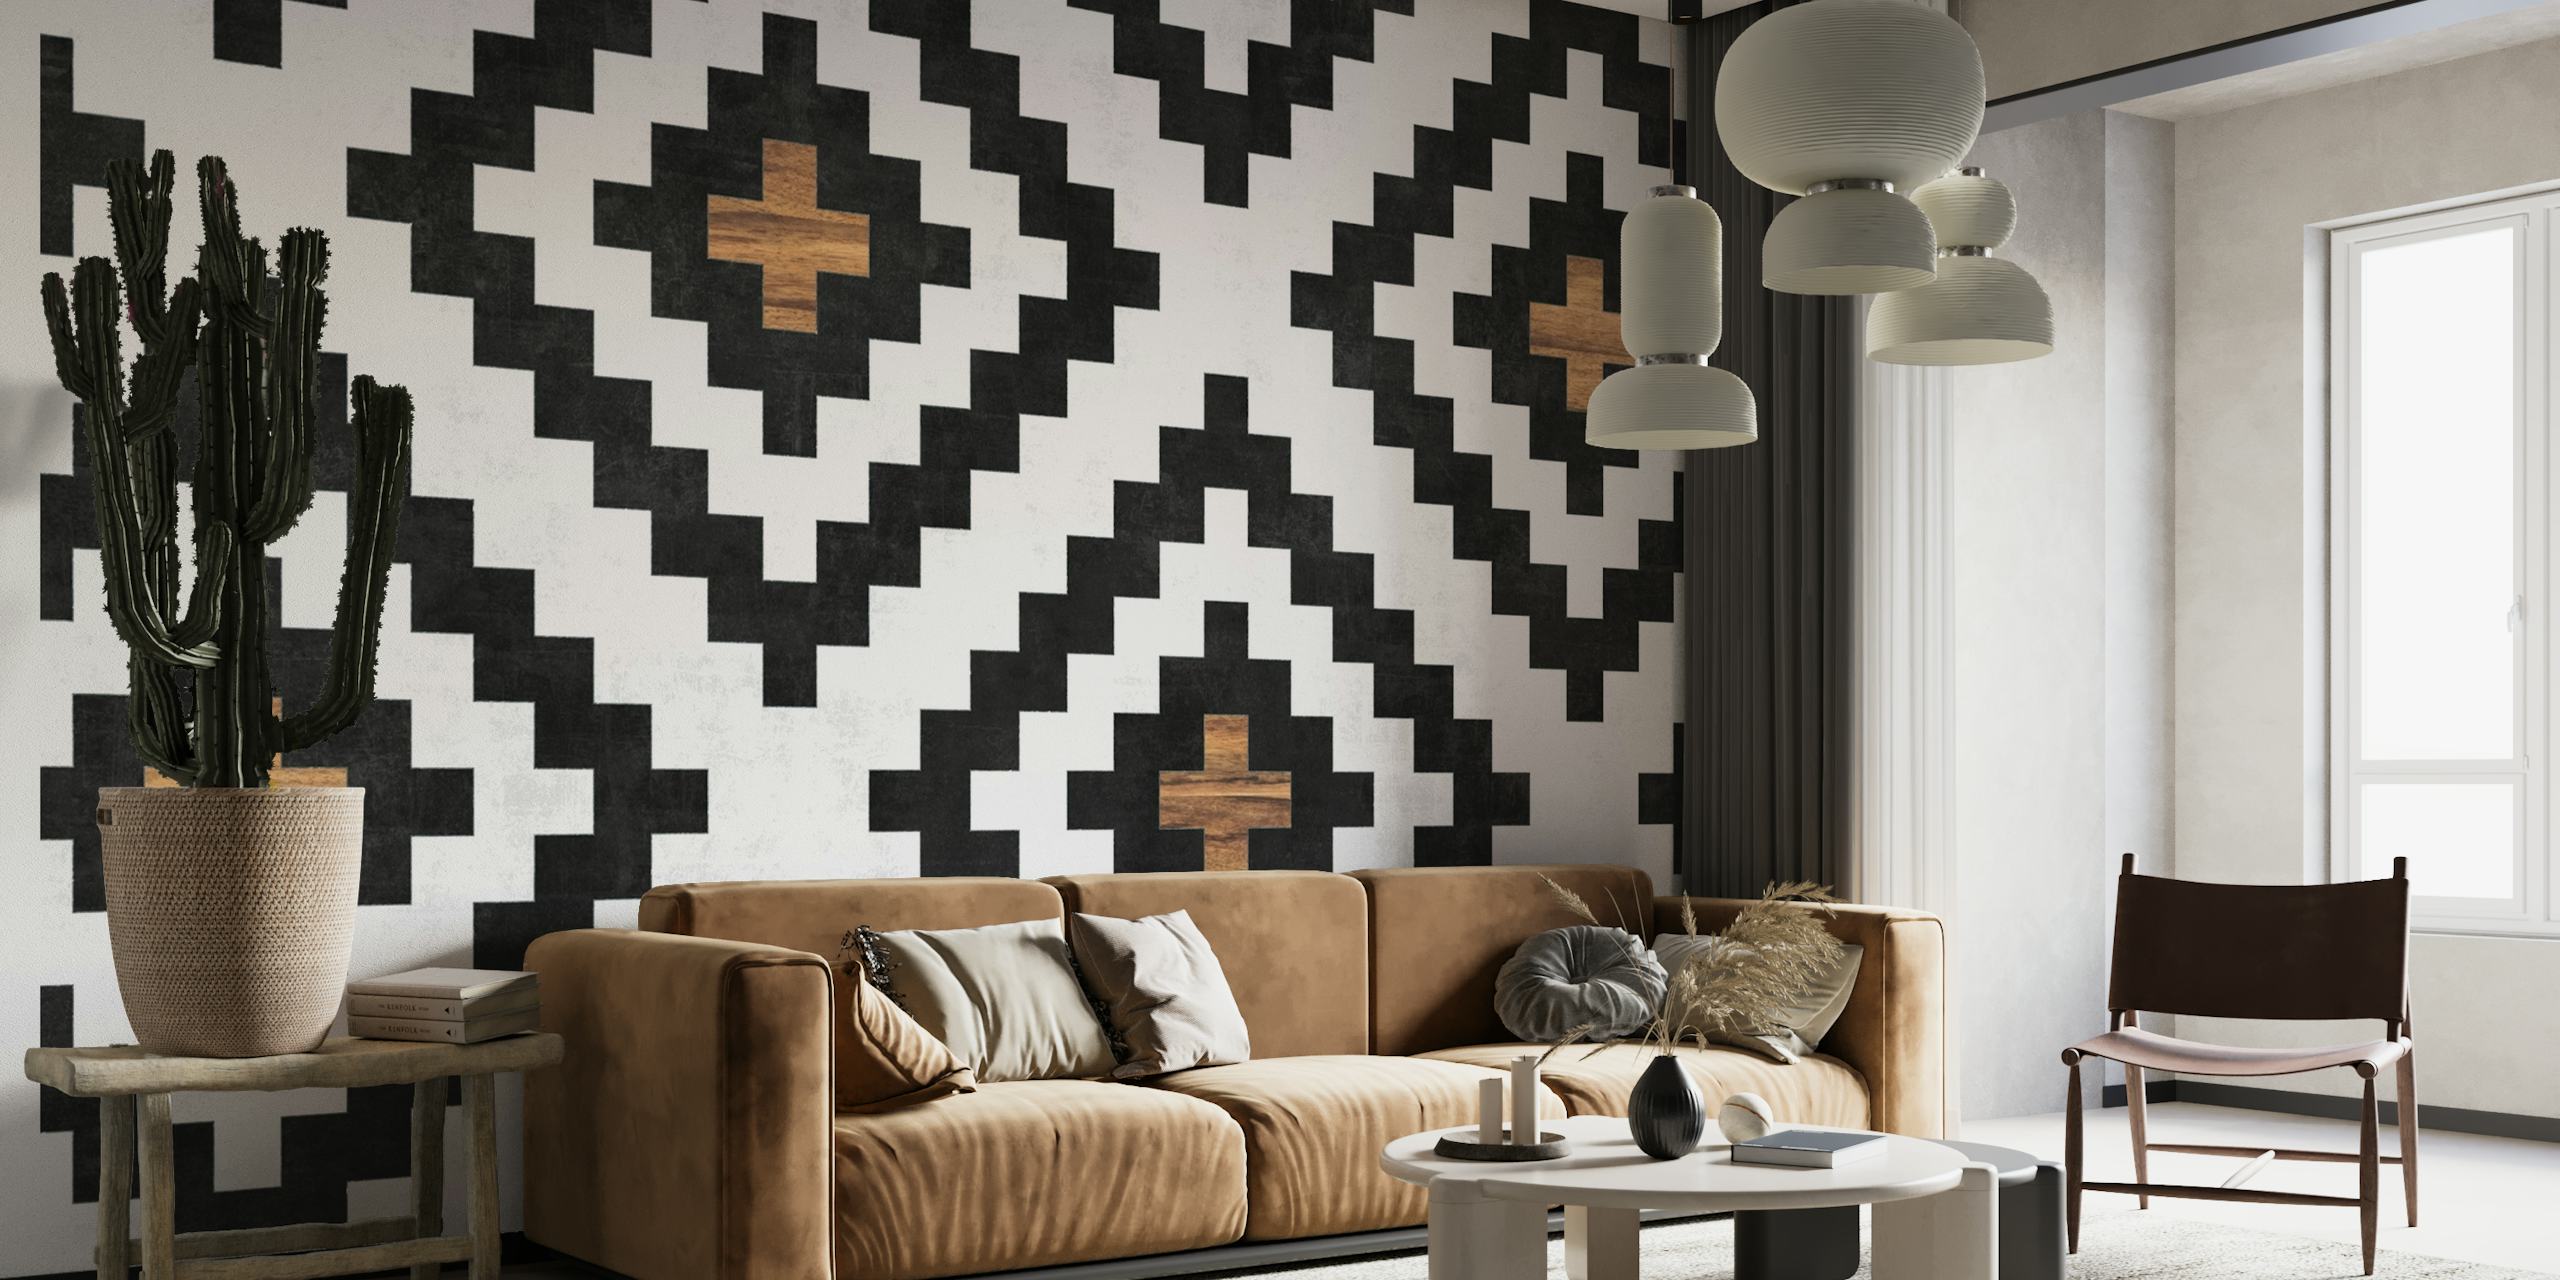 Urban Tribal Pattern wall mural with black and white geometric design